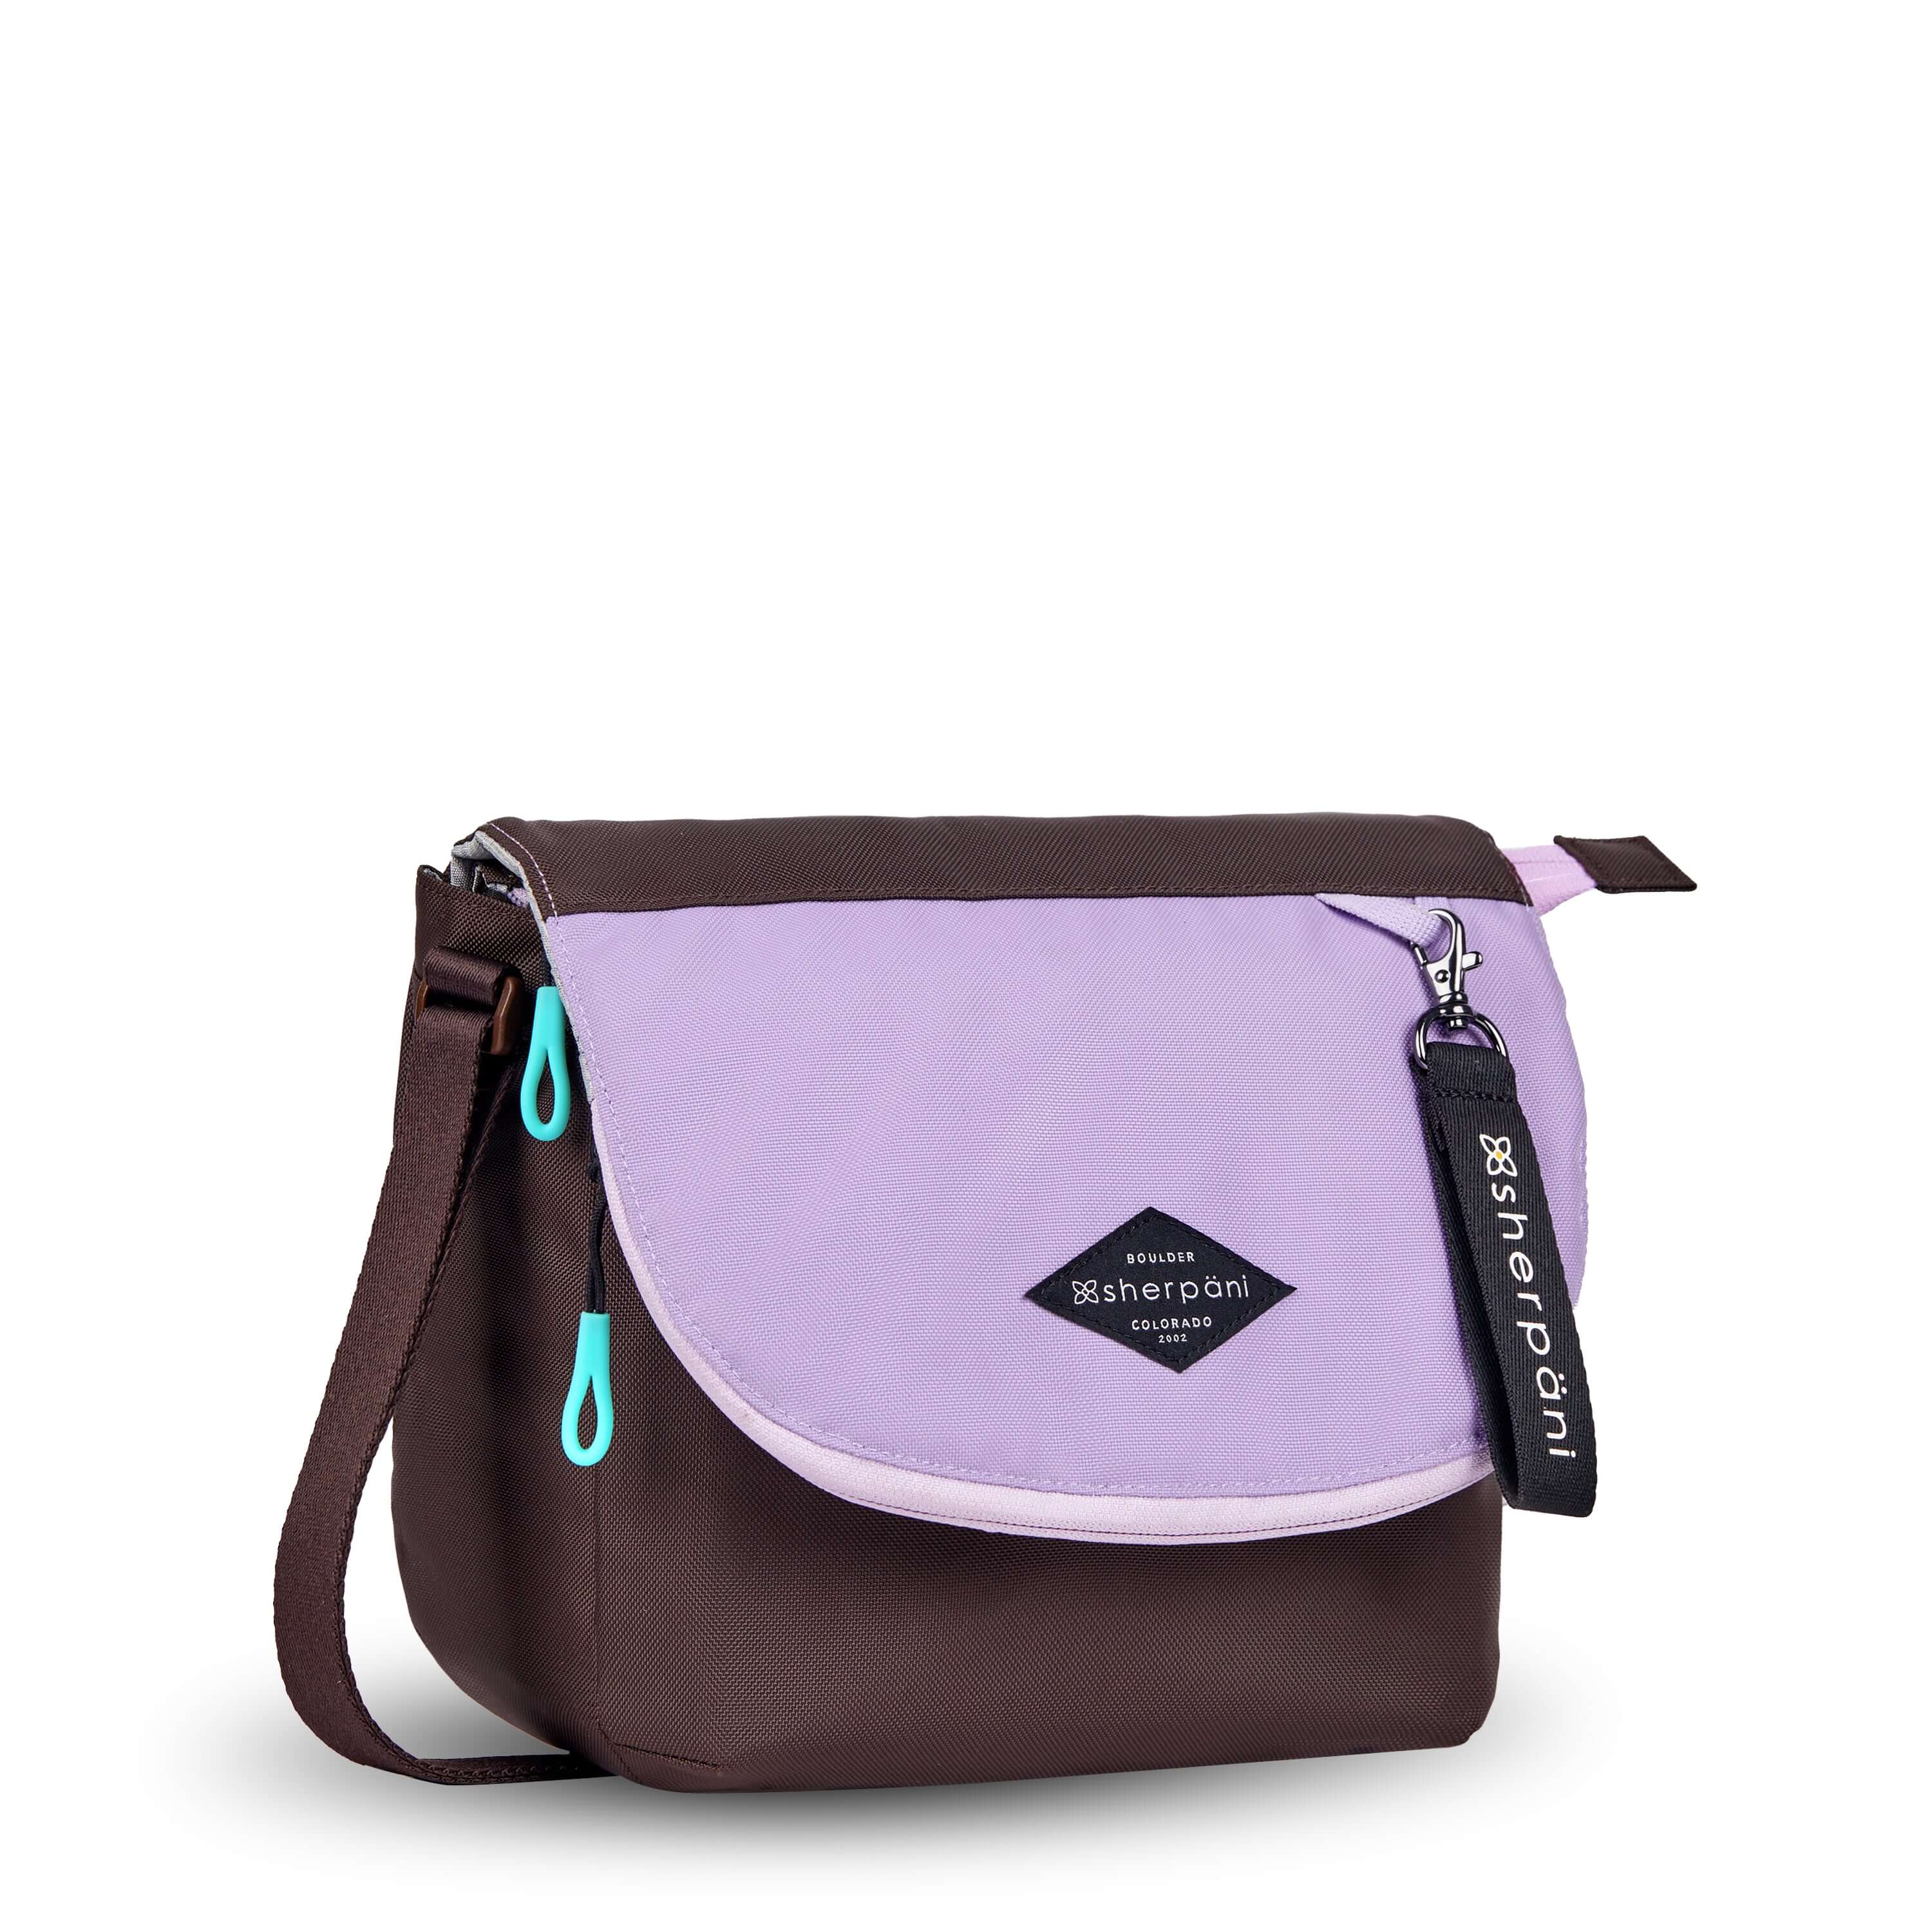 Angled front view of Sherpani crossbody, the Milli in Lavender. The messenger style bag is two-toned: the layover flap is lavender, the remainder of the bag is brown. Easy-pull zippers are accented in aqua. The bag has an adjustable crossbody strap. A branded Sherpani keychain is clipped to a fabric loop in the upper right corner.